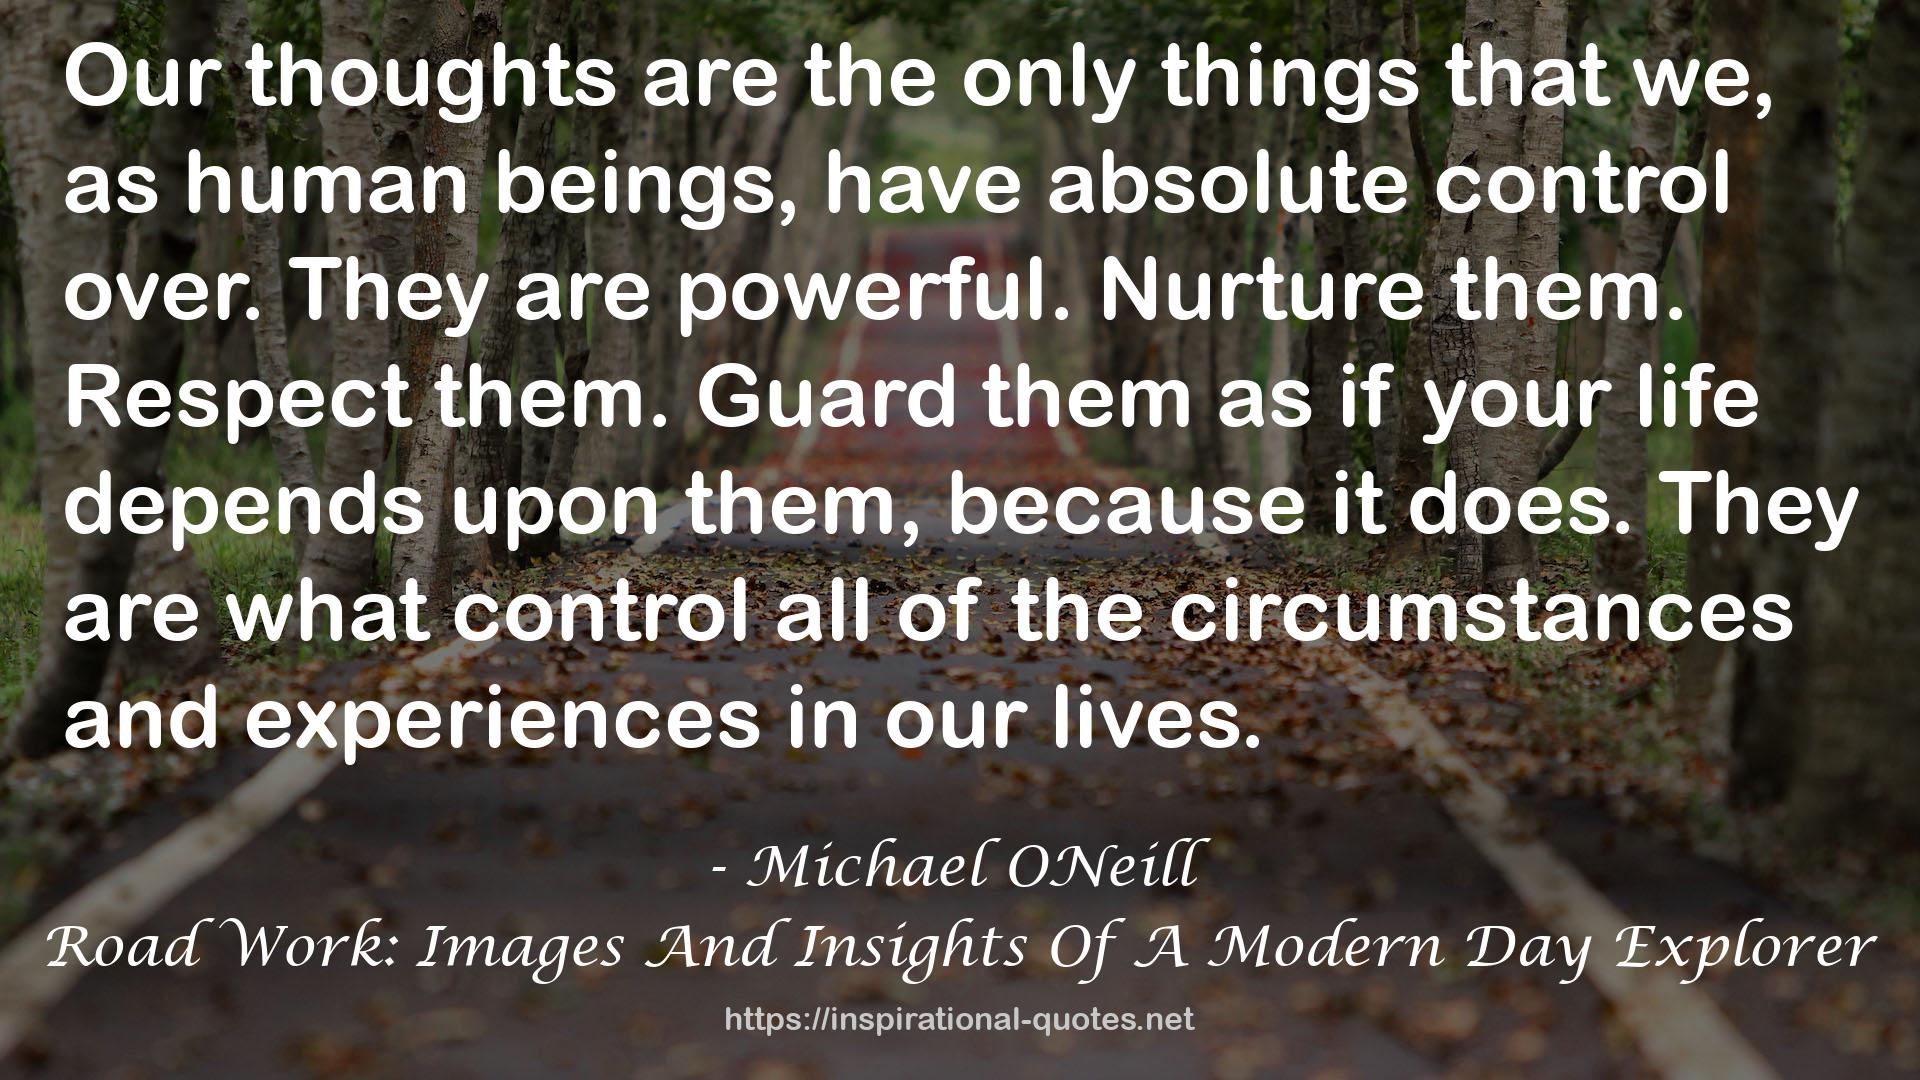 Michael ONeill QUOTES